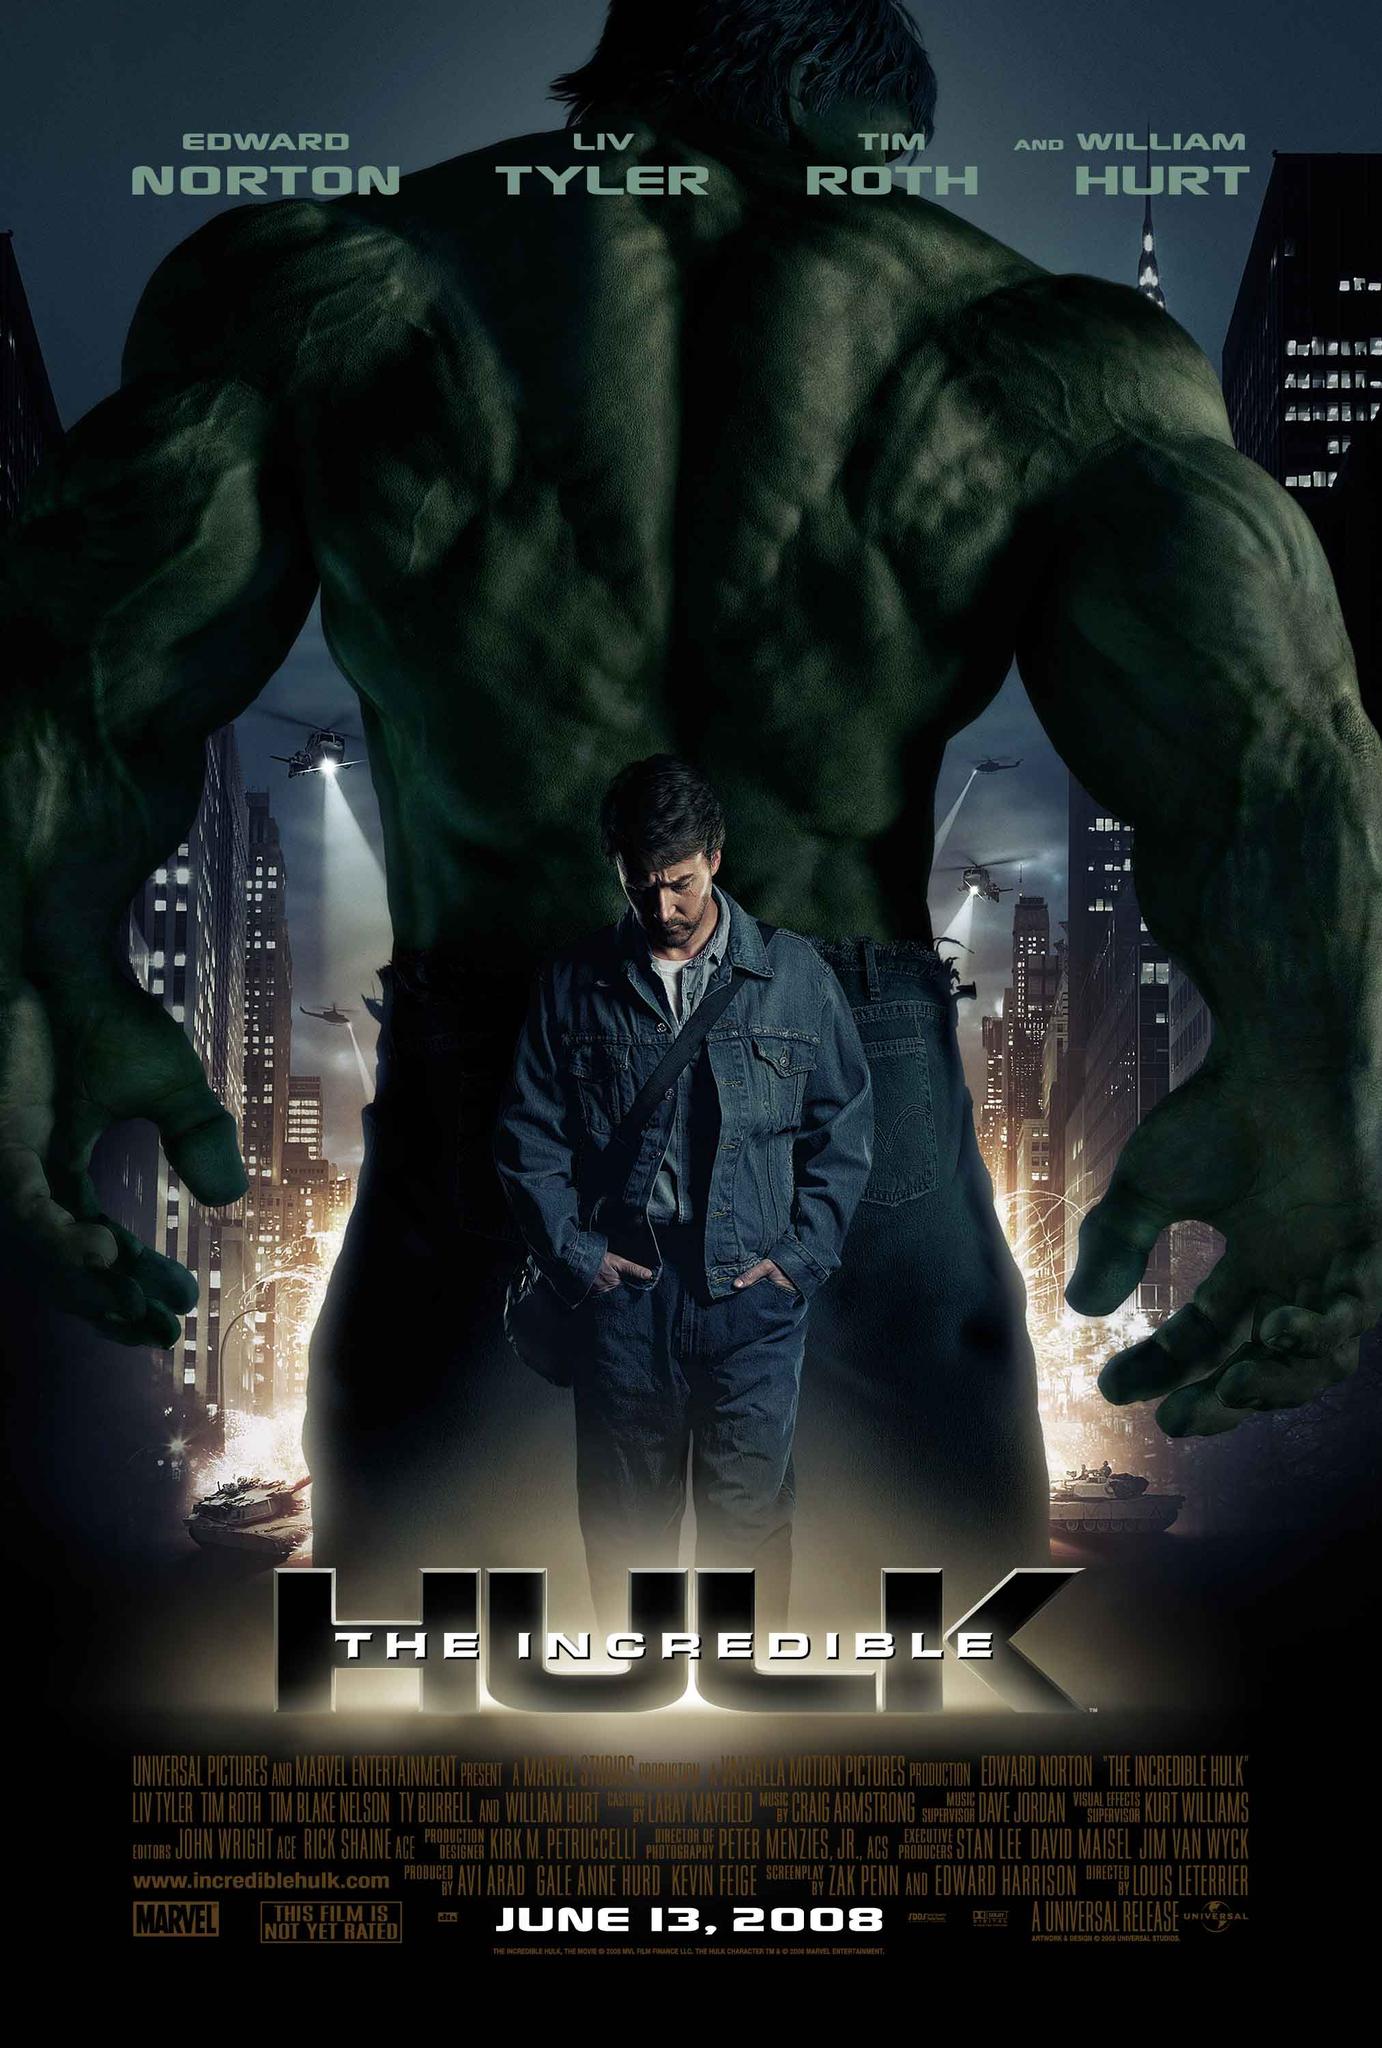 The Incredible Hulk (June 13, 2008) - Follow Bruce Banner's relentless struggle to control his inner demons as he transforms into the unstoppable force known as the Hulk.